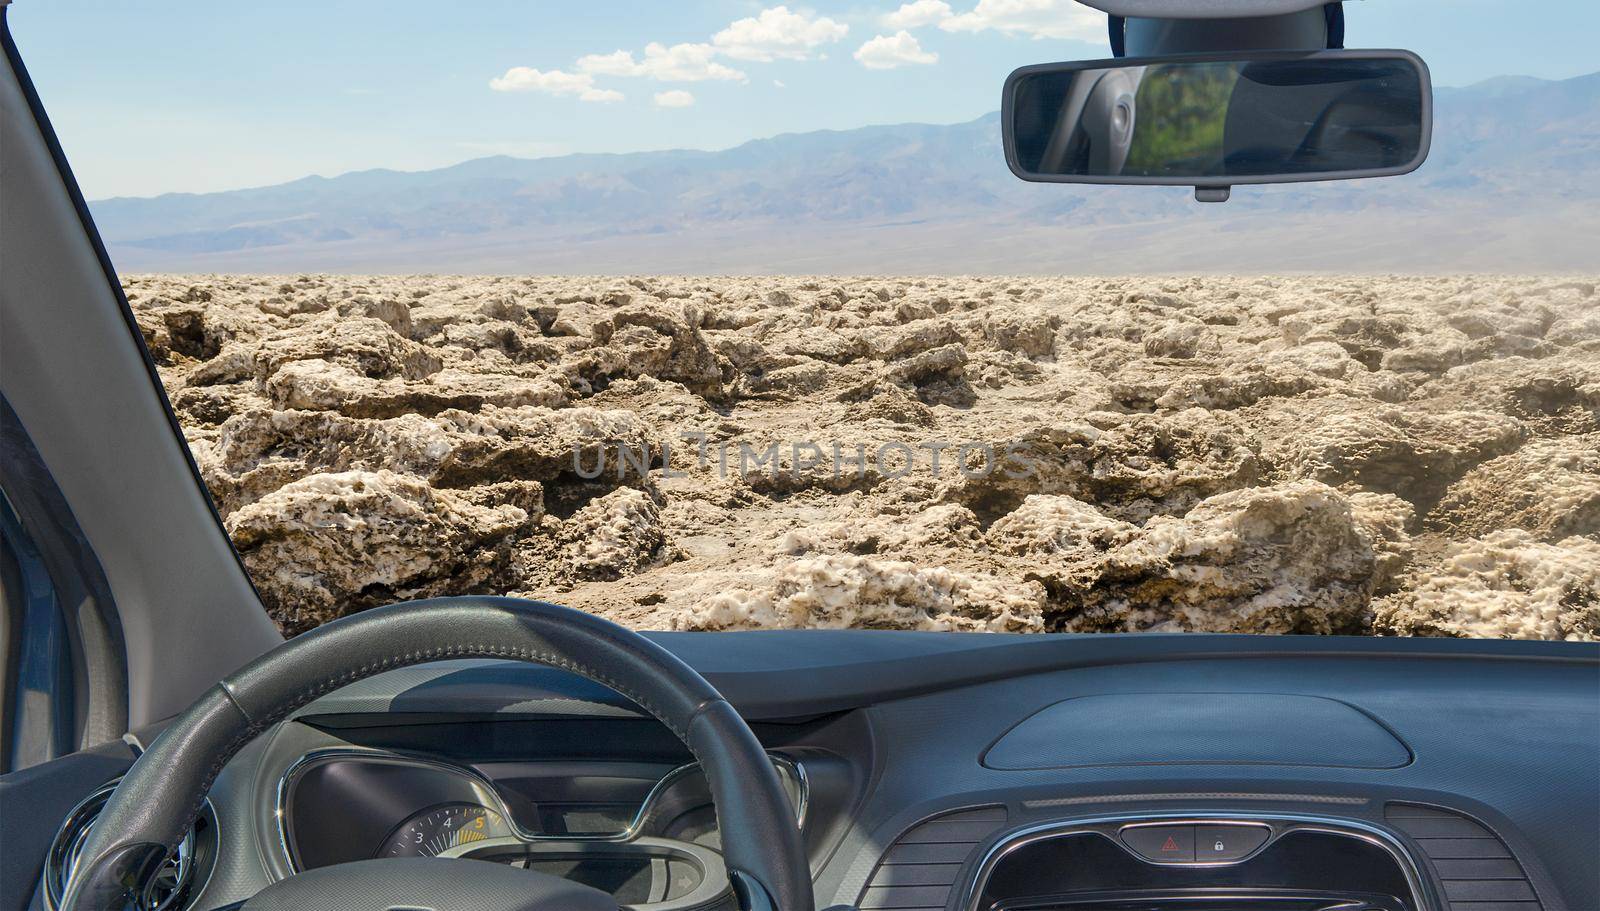 Looking through a car windshield with view of Devil's Golf Course, Death Valley, USA